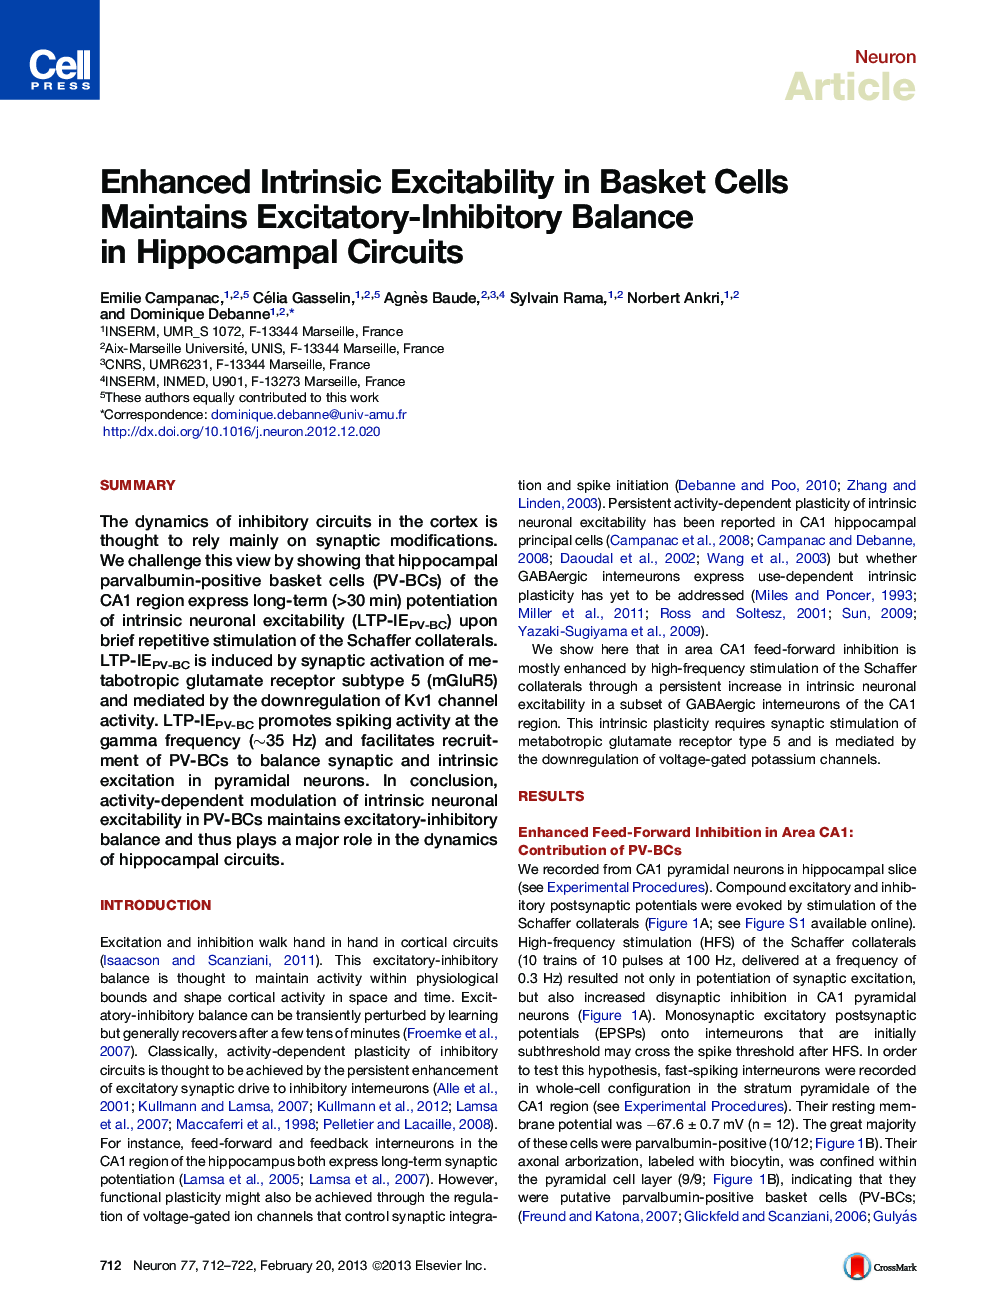 Enhanced Intrinsic Excitability in Basket Cells Maintains Excitatory-Inhibitory Balance in Hippocampal Circuits